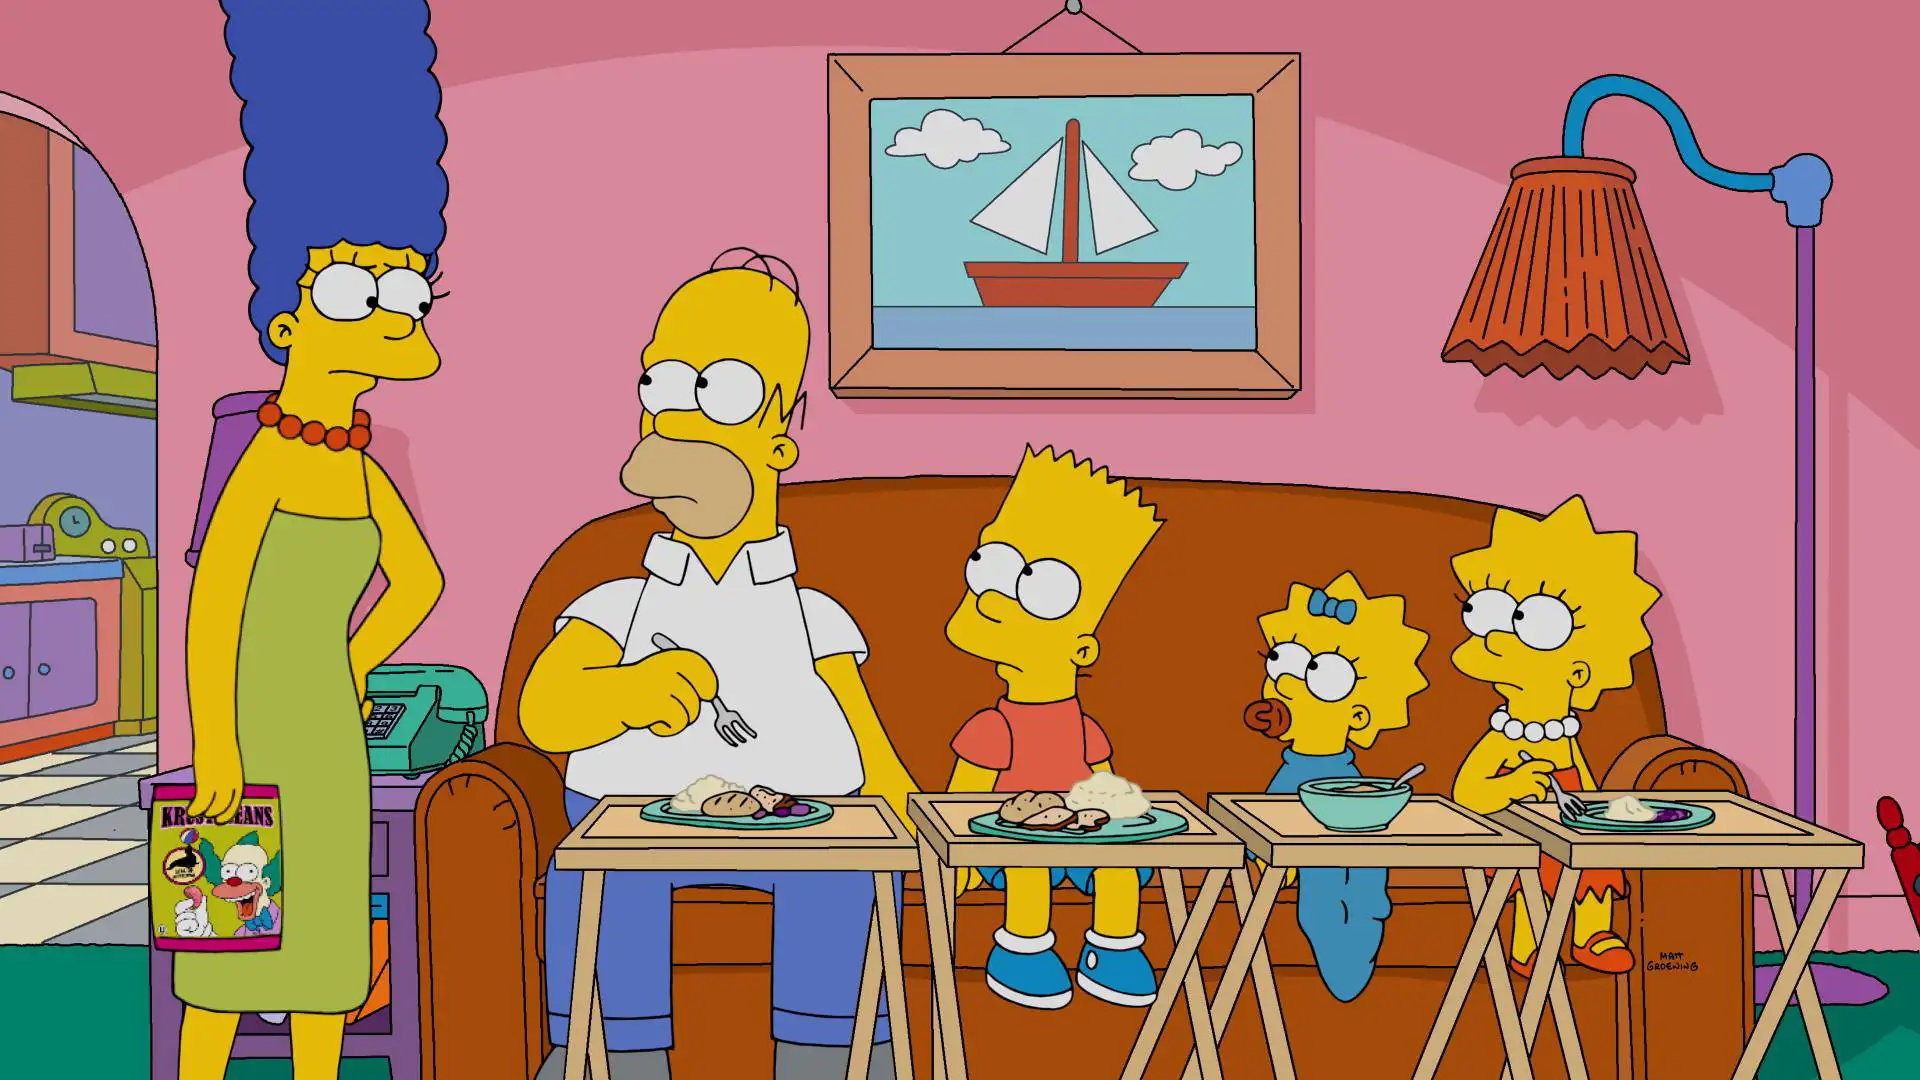 THE SIMPSONS, (from left): Marge Simpson, Homer Simpson, Bart Simpson, Maggie Simpson, Lisa